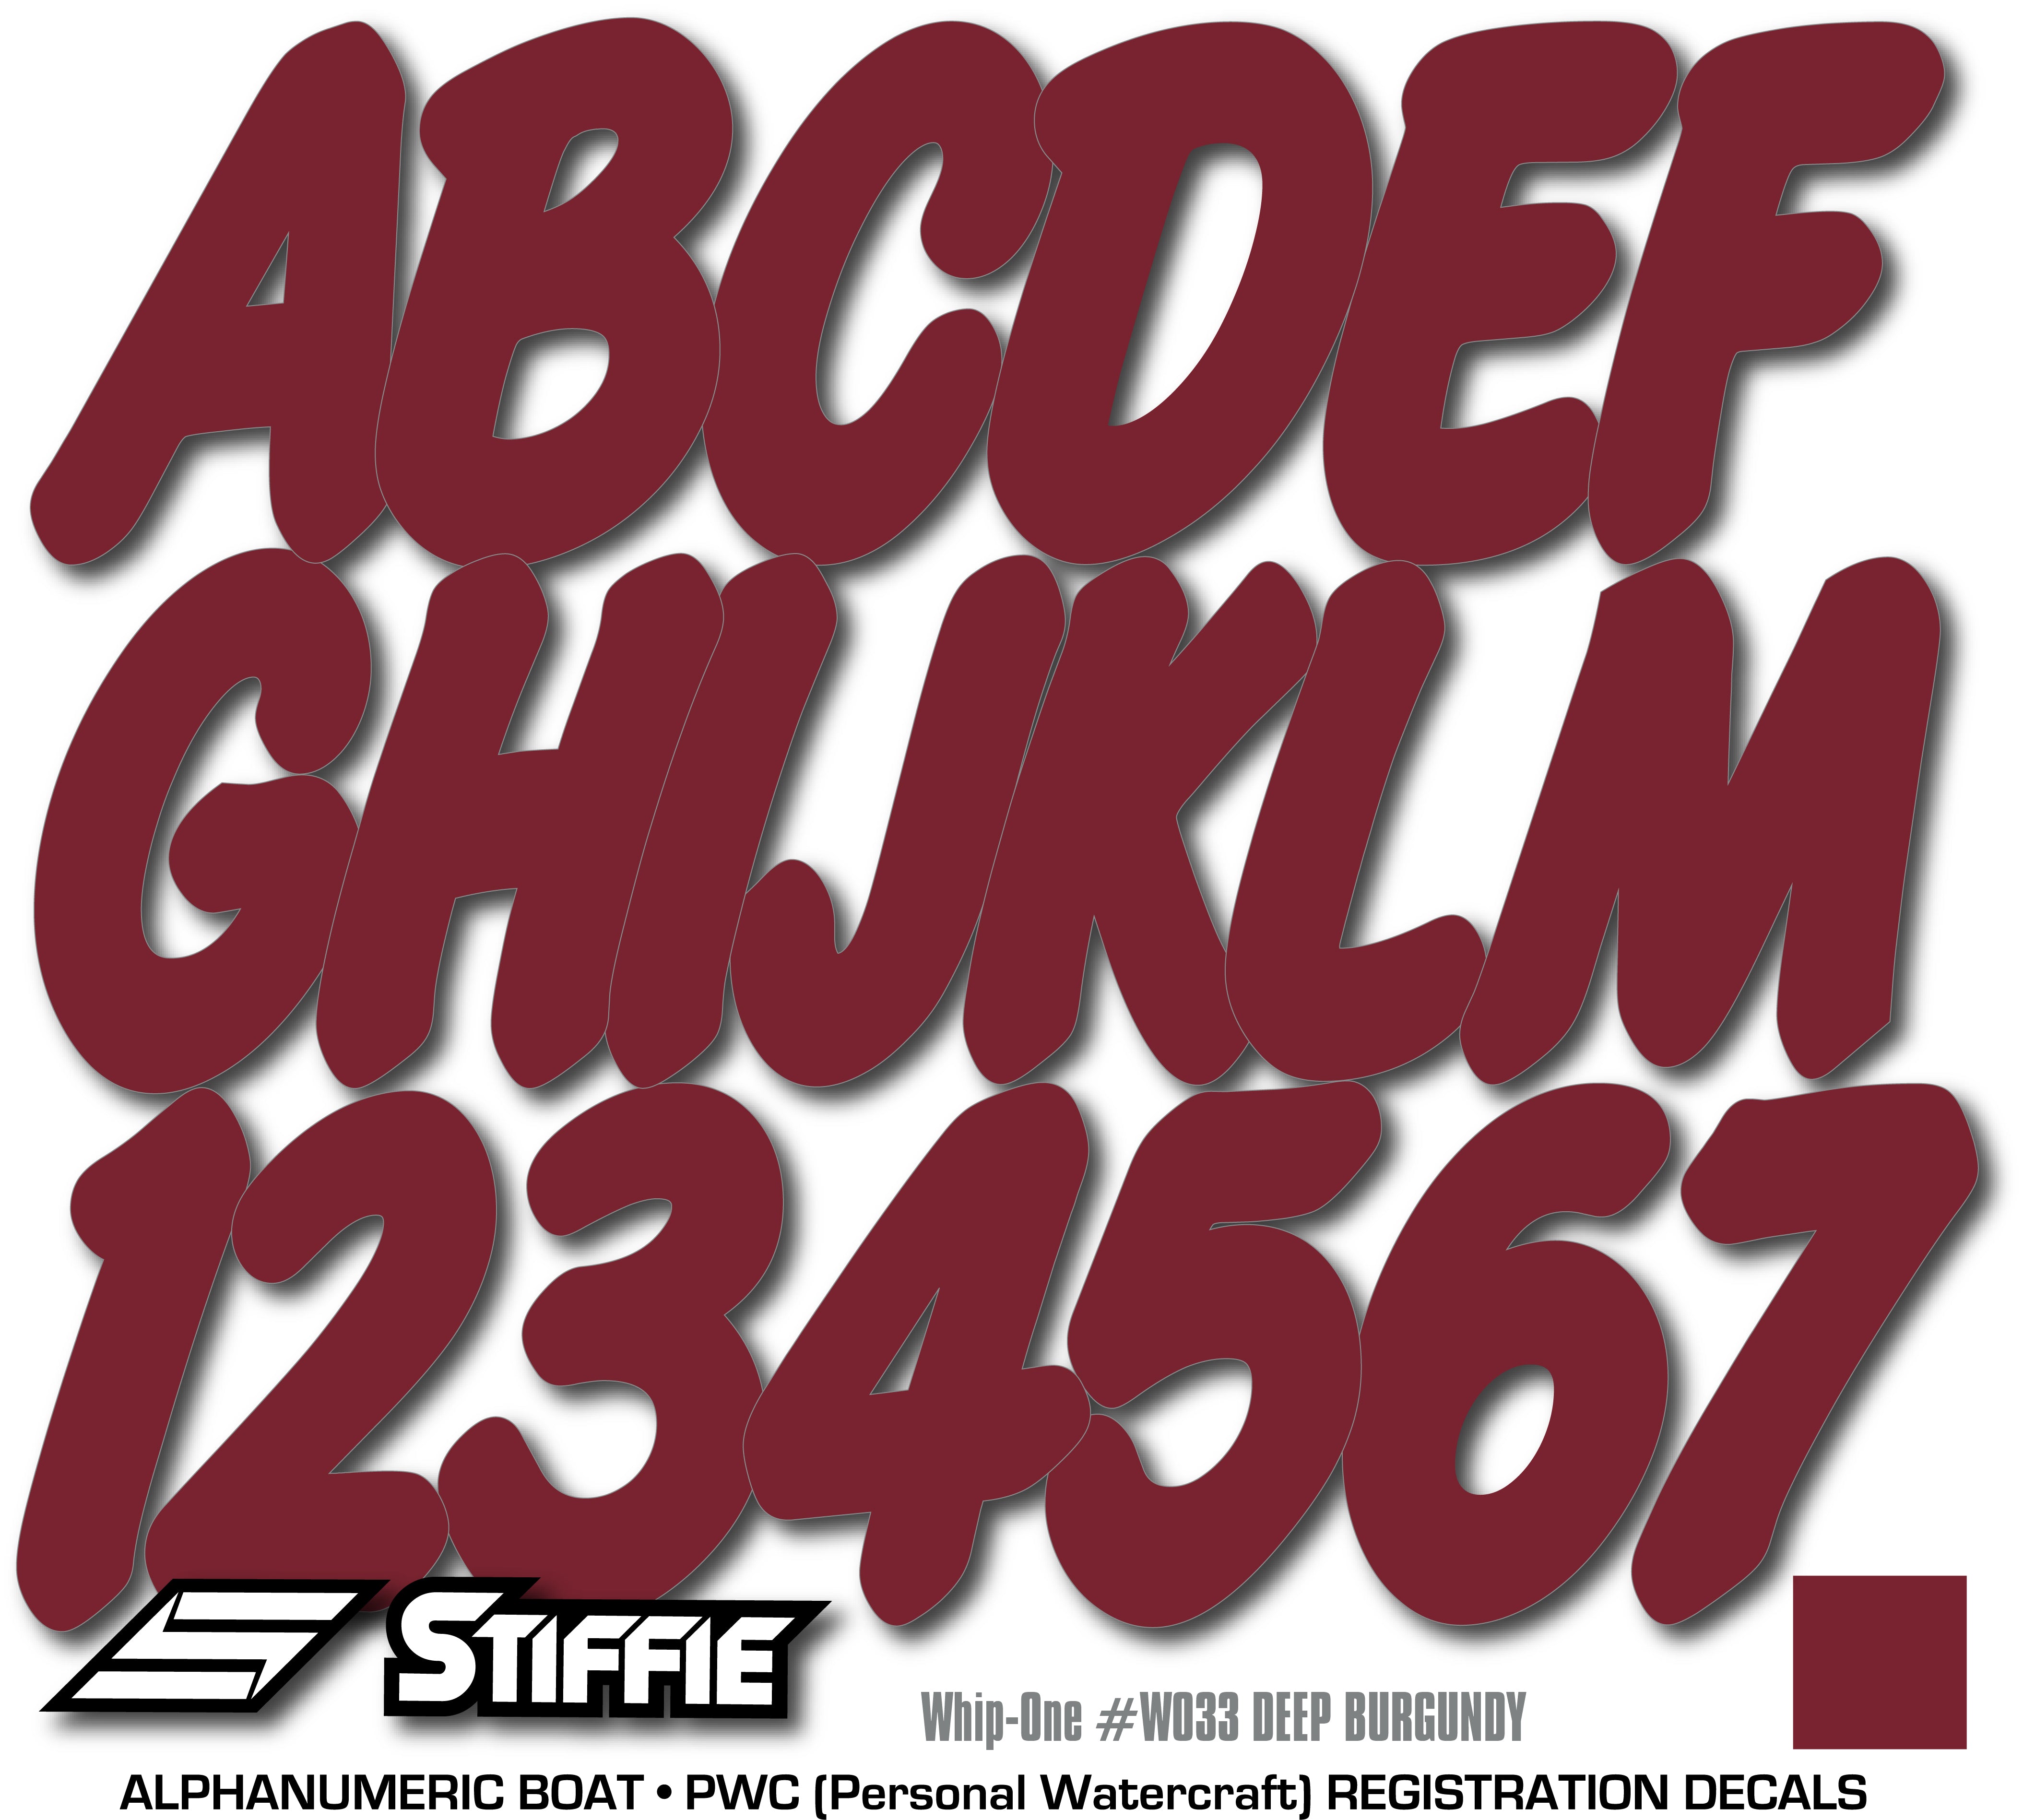 Stiffie Whip-One Lava Red Super Sticky 3" Alpha Numeric Registration Identification Numbers Stickers Decals for Sea-Doo Spark, Inflatable Boats, Ribs, Hypalon/PVC, PWC and Boats